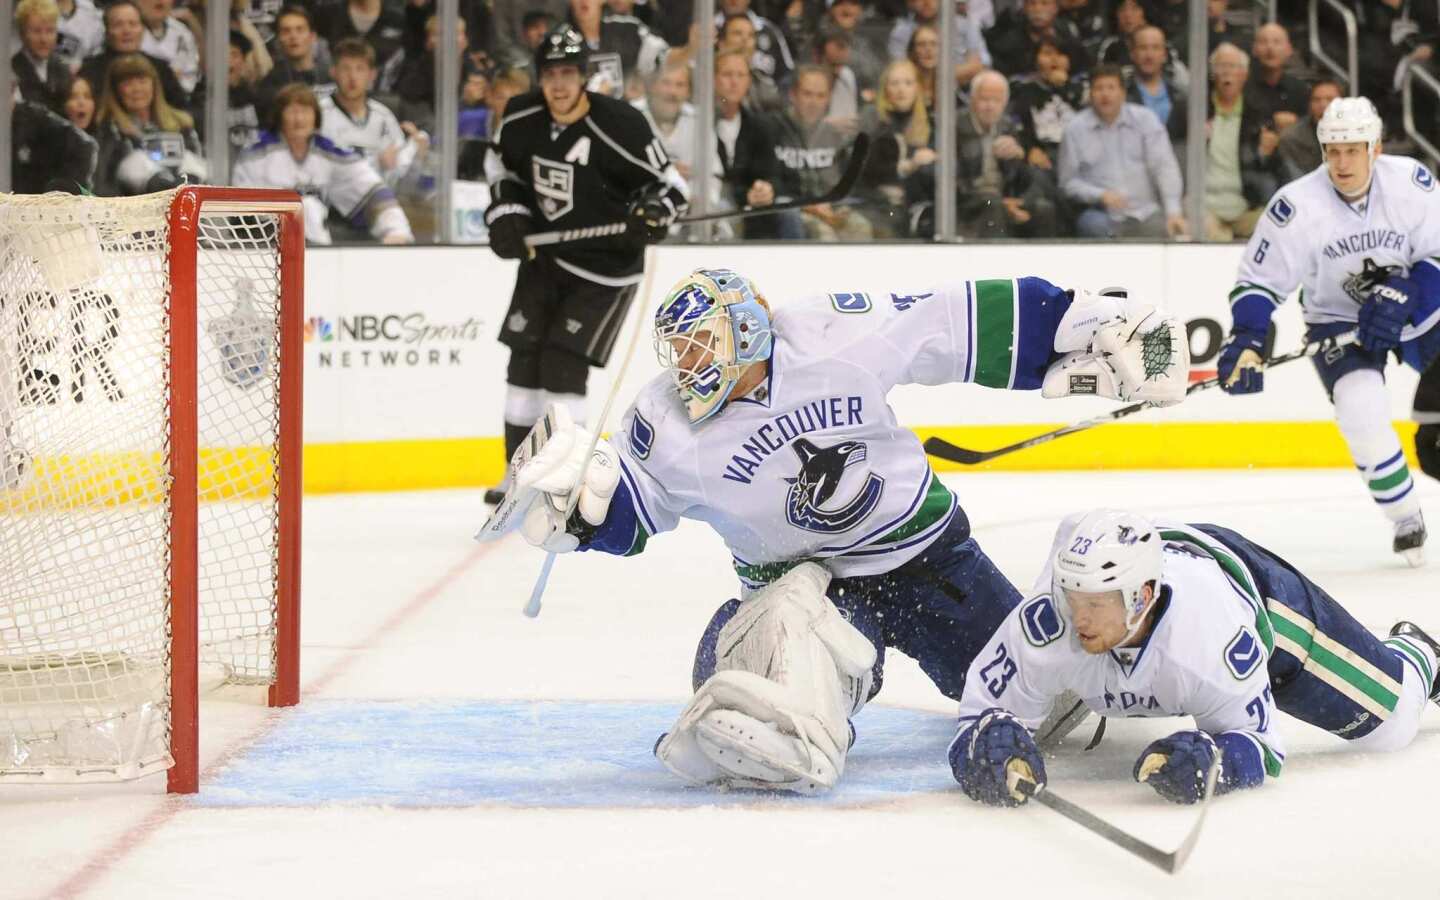 Canucks goaltender Cory Schneider and defenseman Alexander Edler watch as a shot by Dustin Brown (not pictured) goes into the goal in the third period Sunday night at Staples Center.